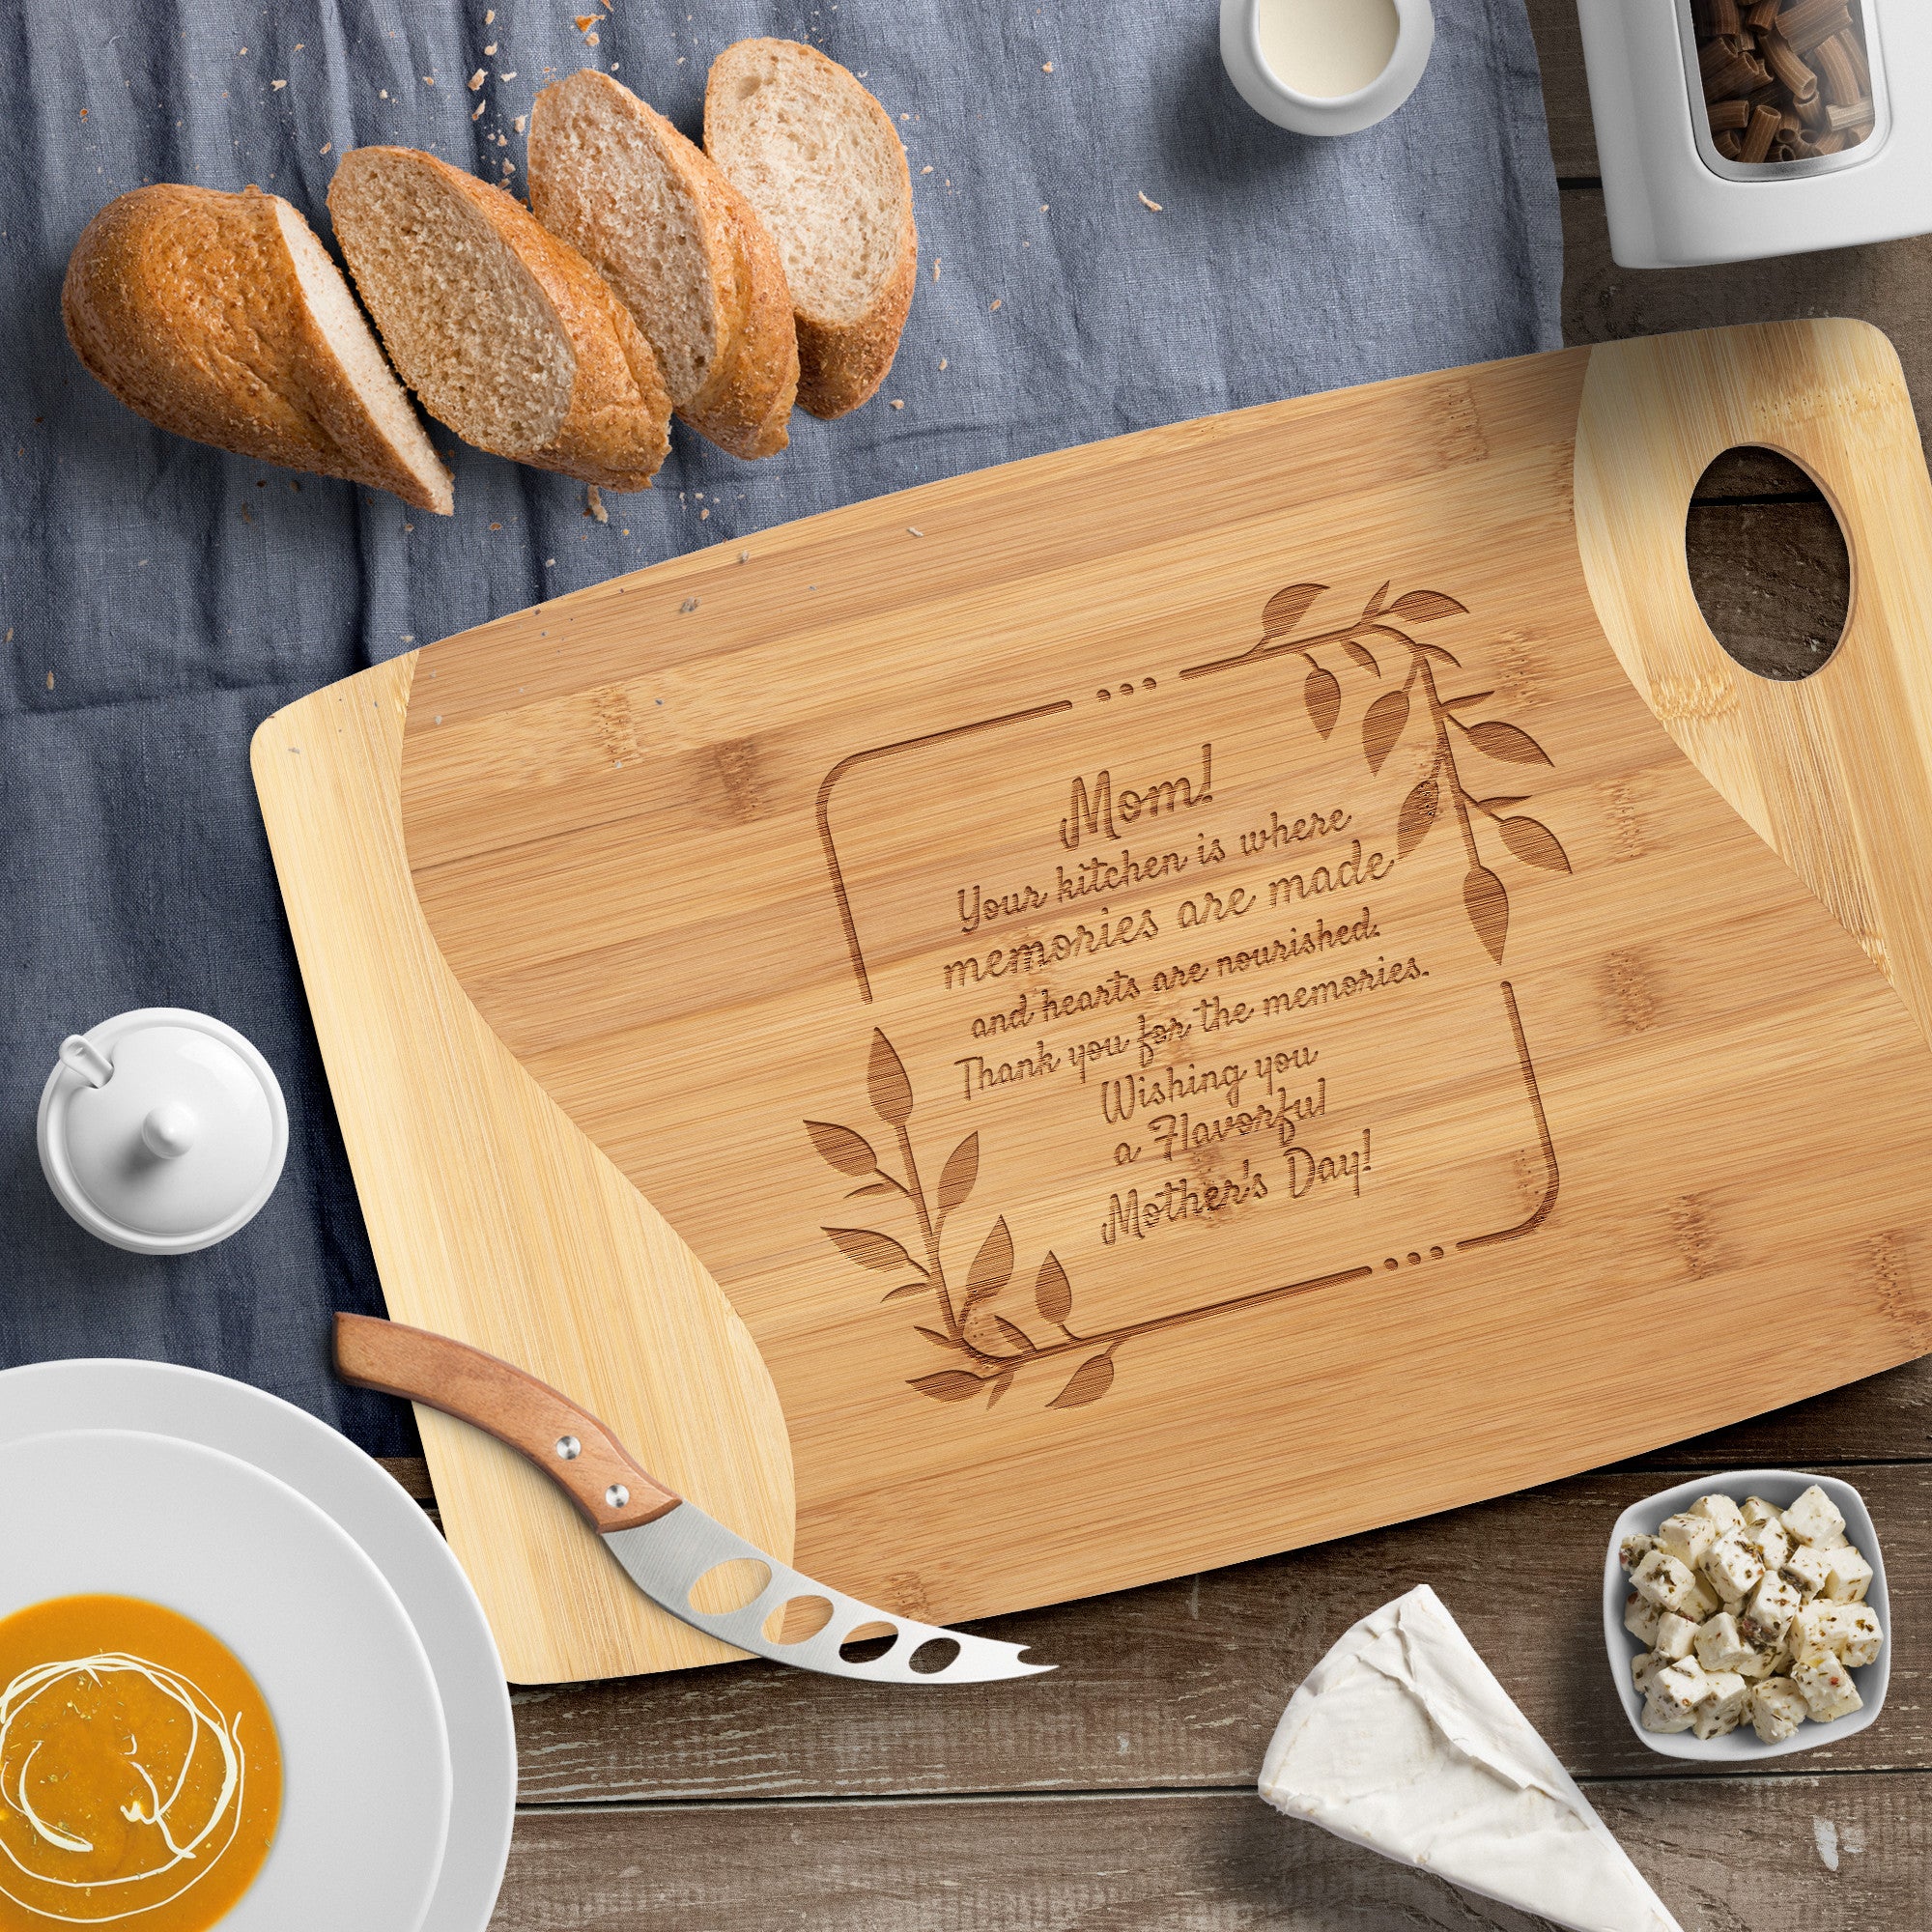 Memories Are Made - Cutting Board for Mother's Day